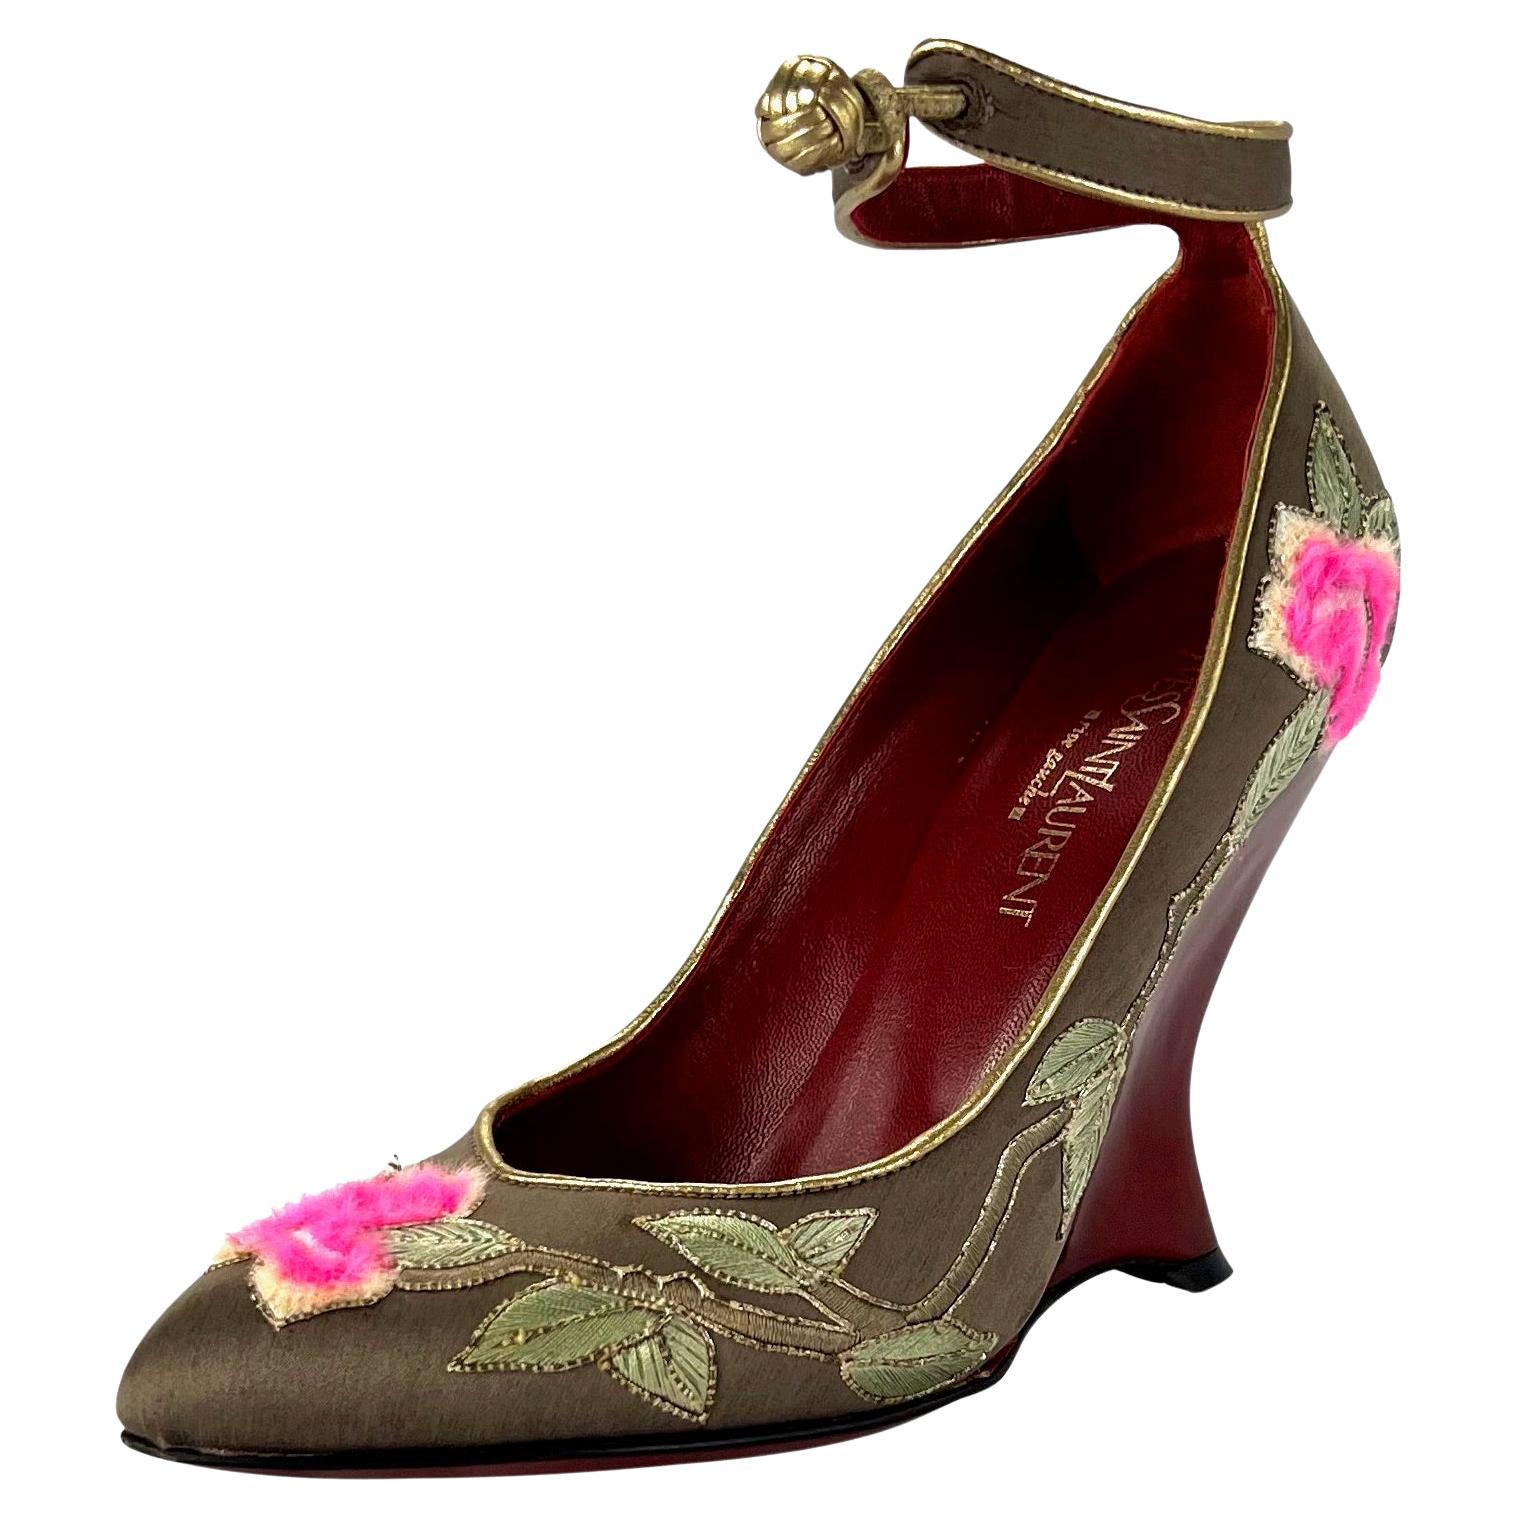 Marron F/W 2004 Yves Saint Laurent by Tom Ford - Chaussures compensées brodées Chinoiserie Taille 36 en vente